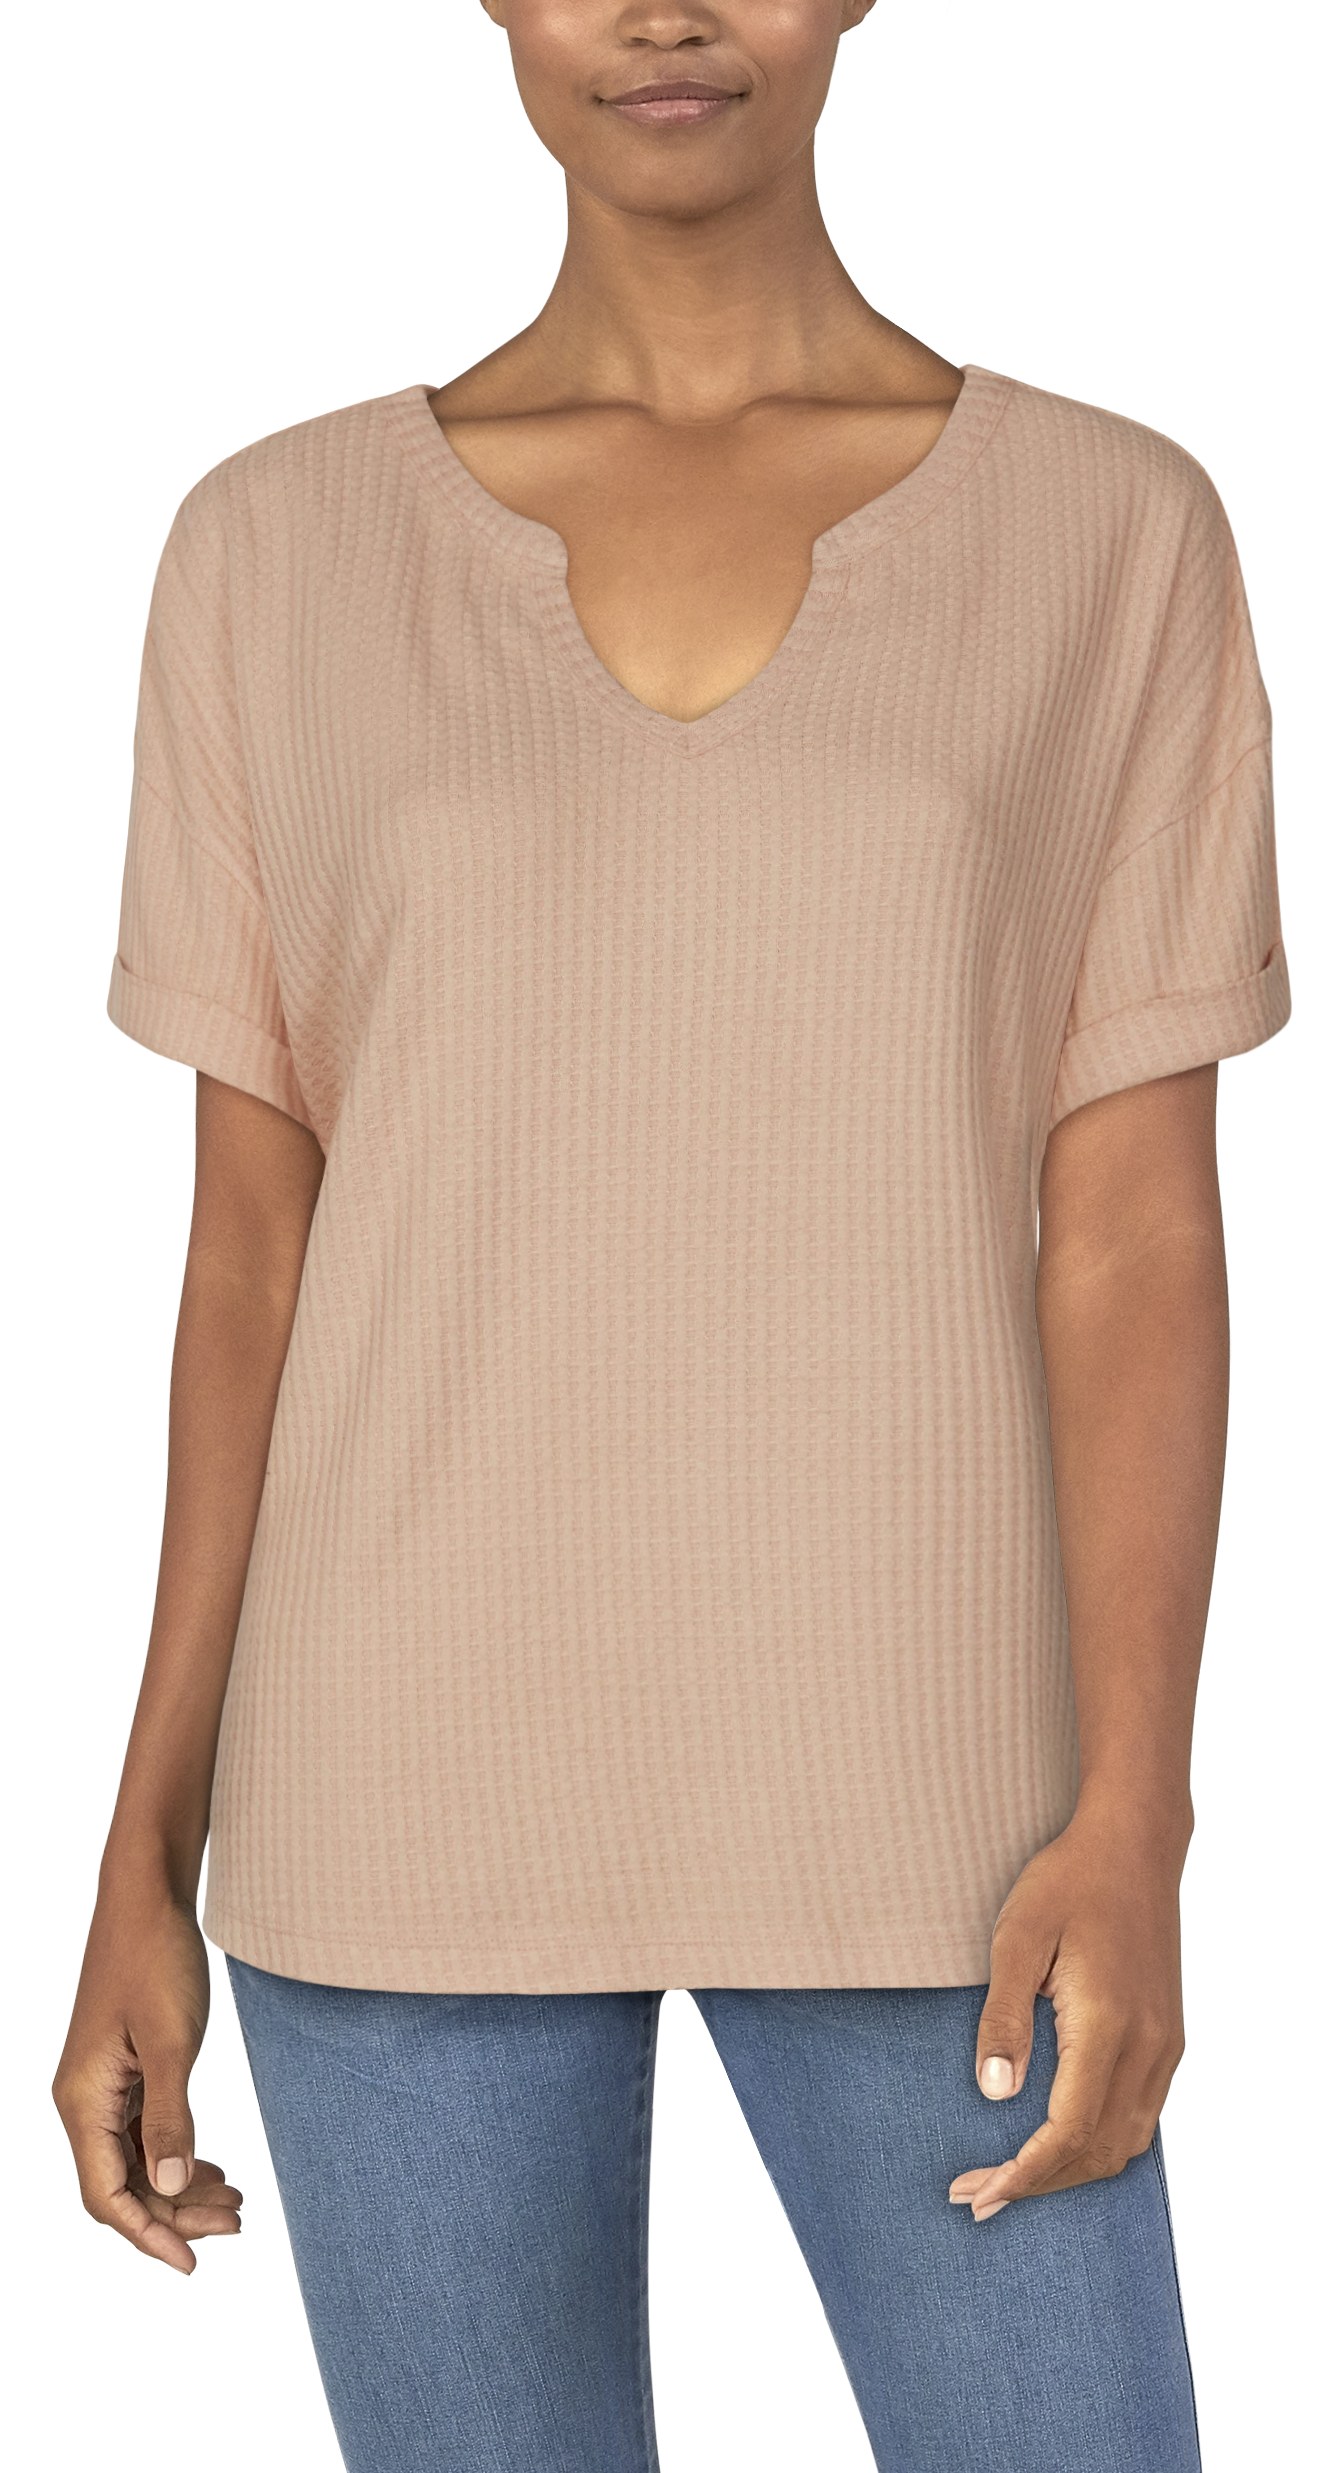 Natural Reflections Brush Creek Waffle Short-Sleeve Shirt for Ladies - Almost Apricot - 2X